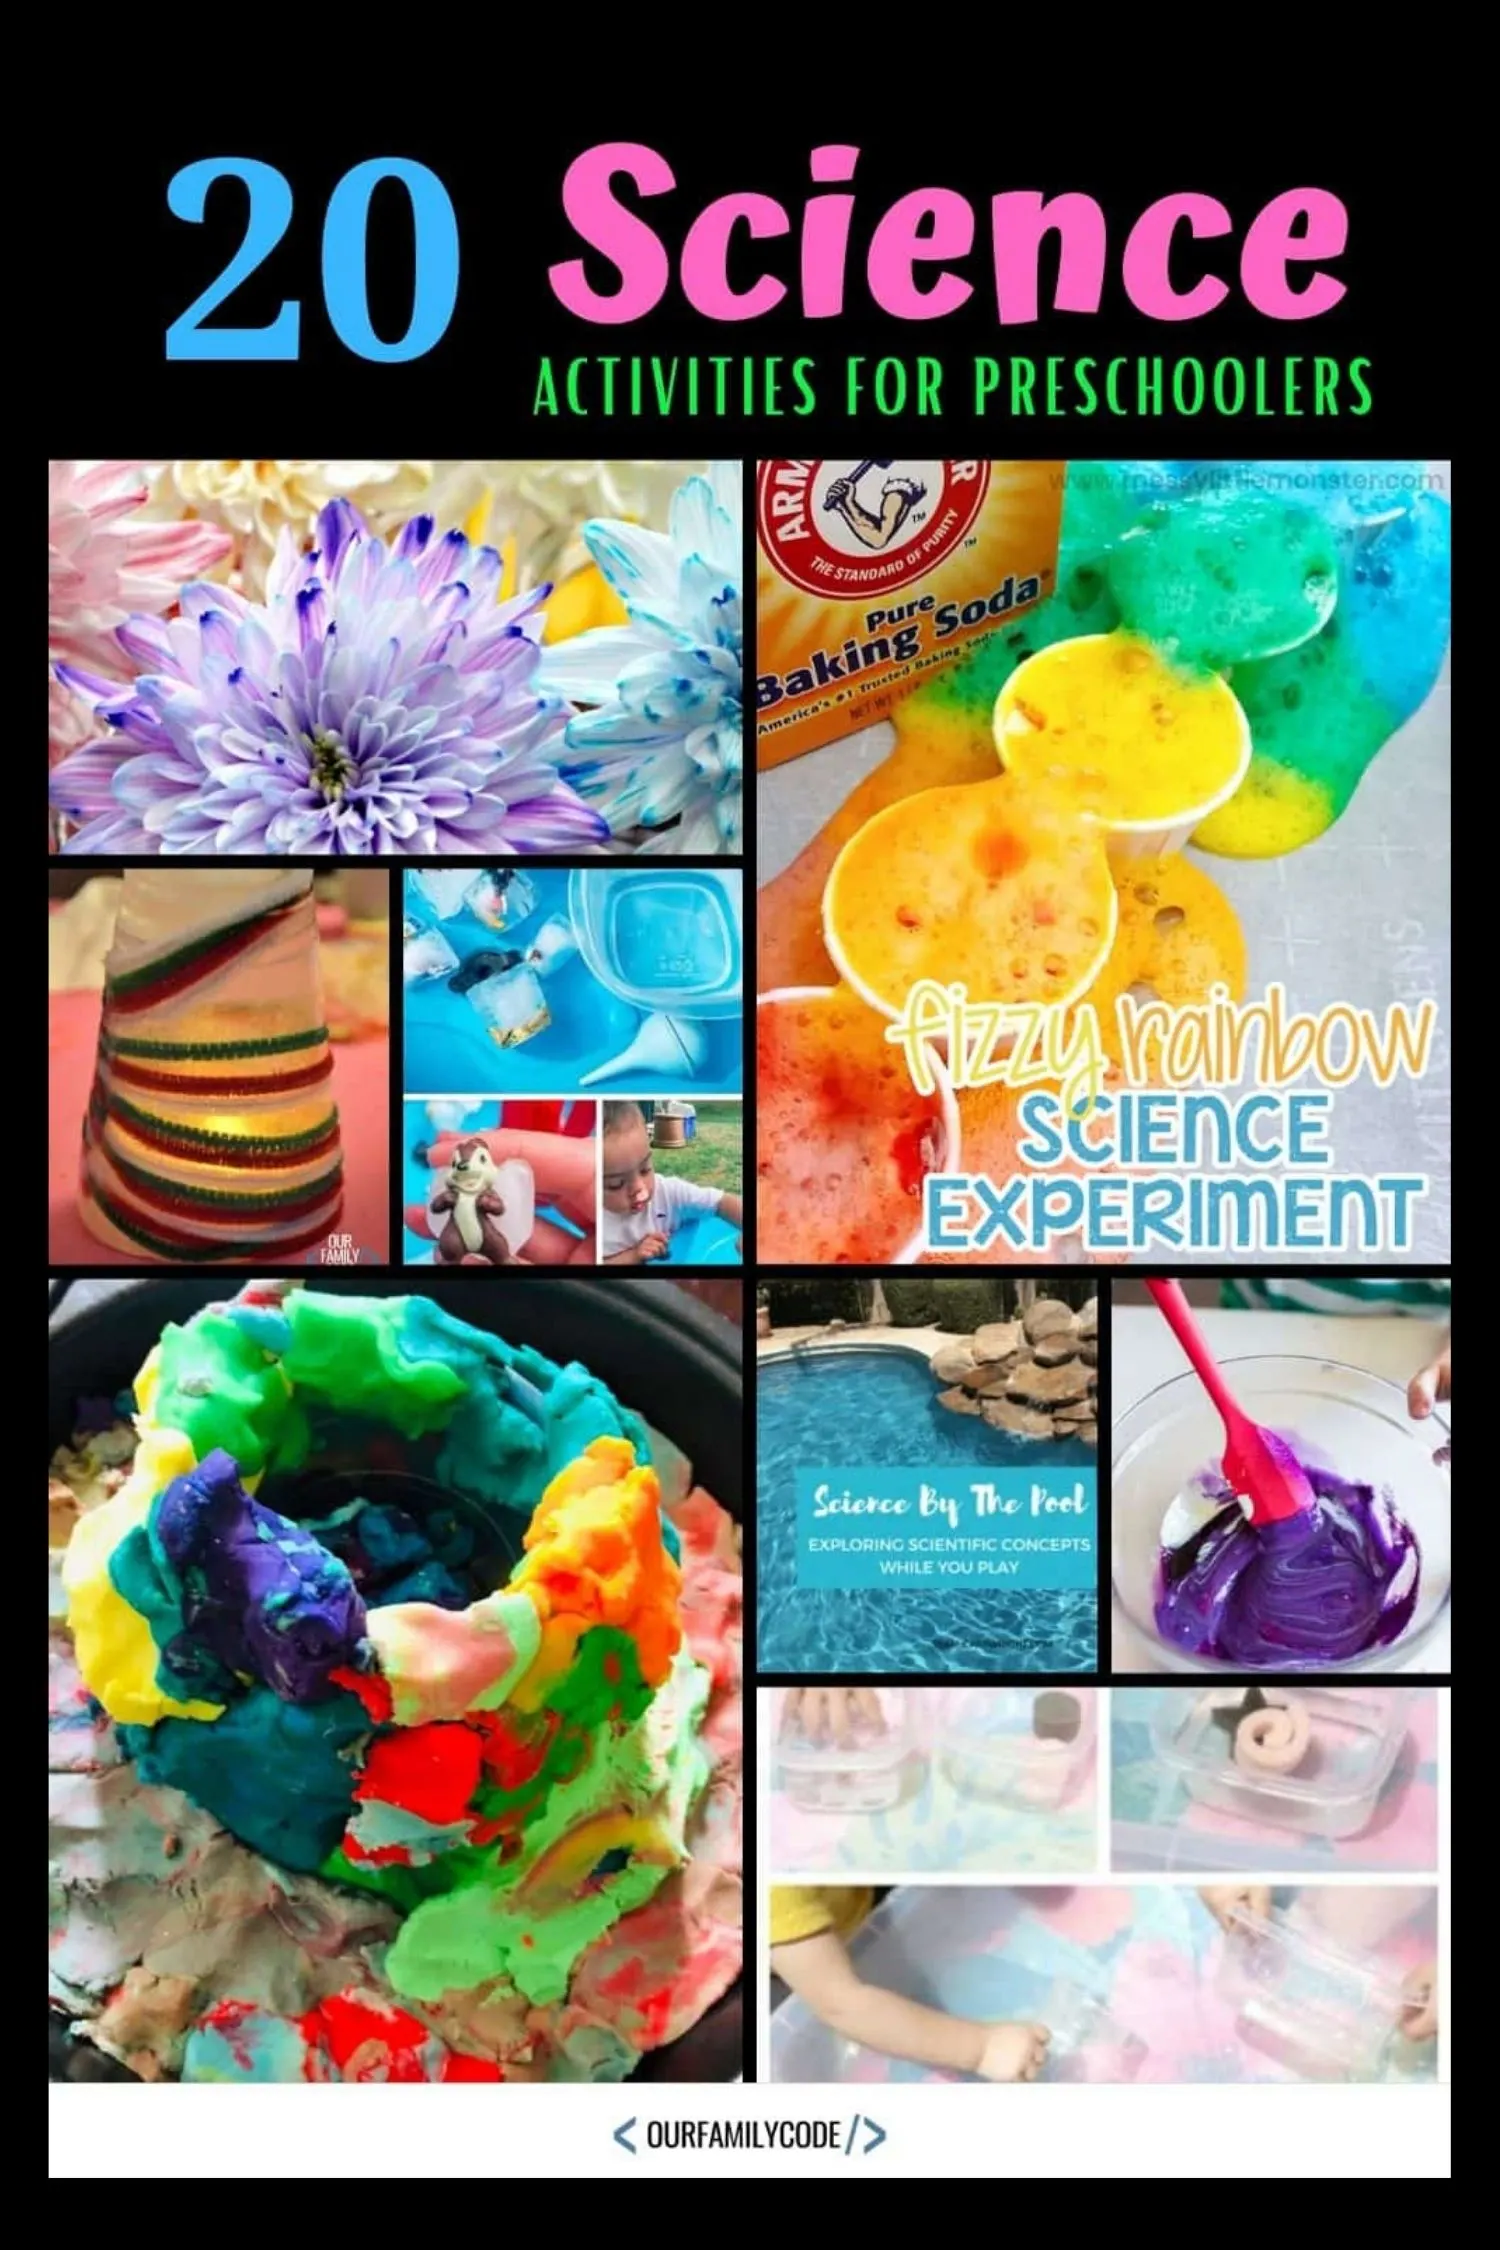 A picture of 20 science activities for preschoolers in a collage.